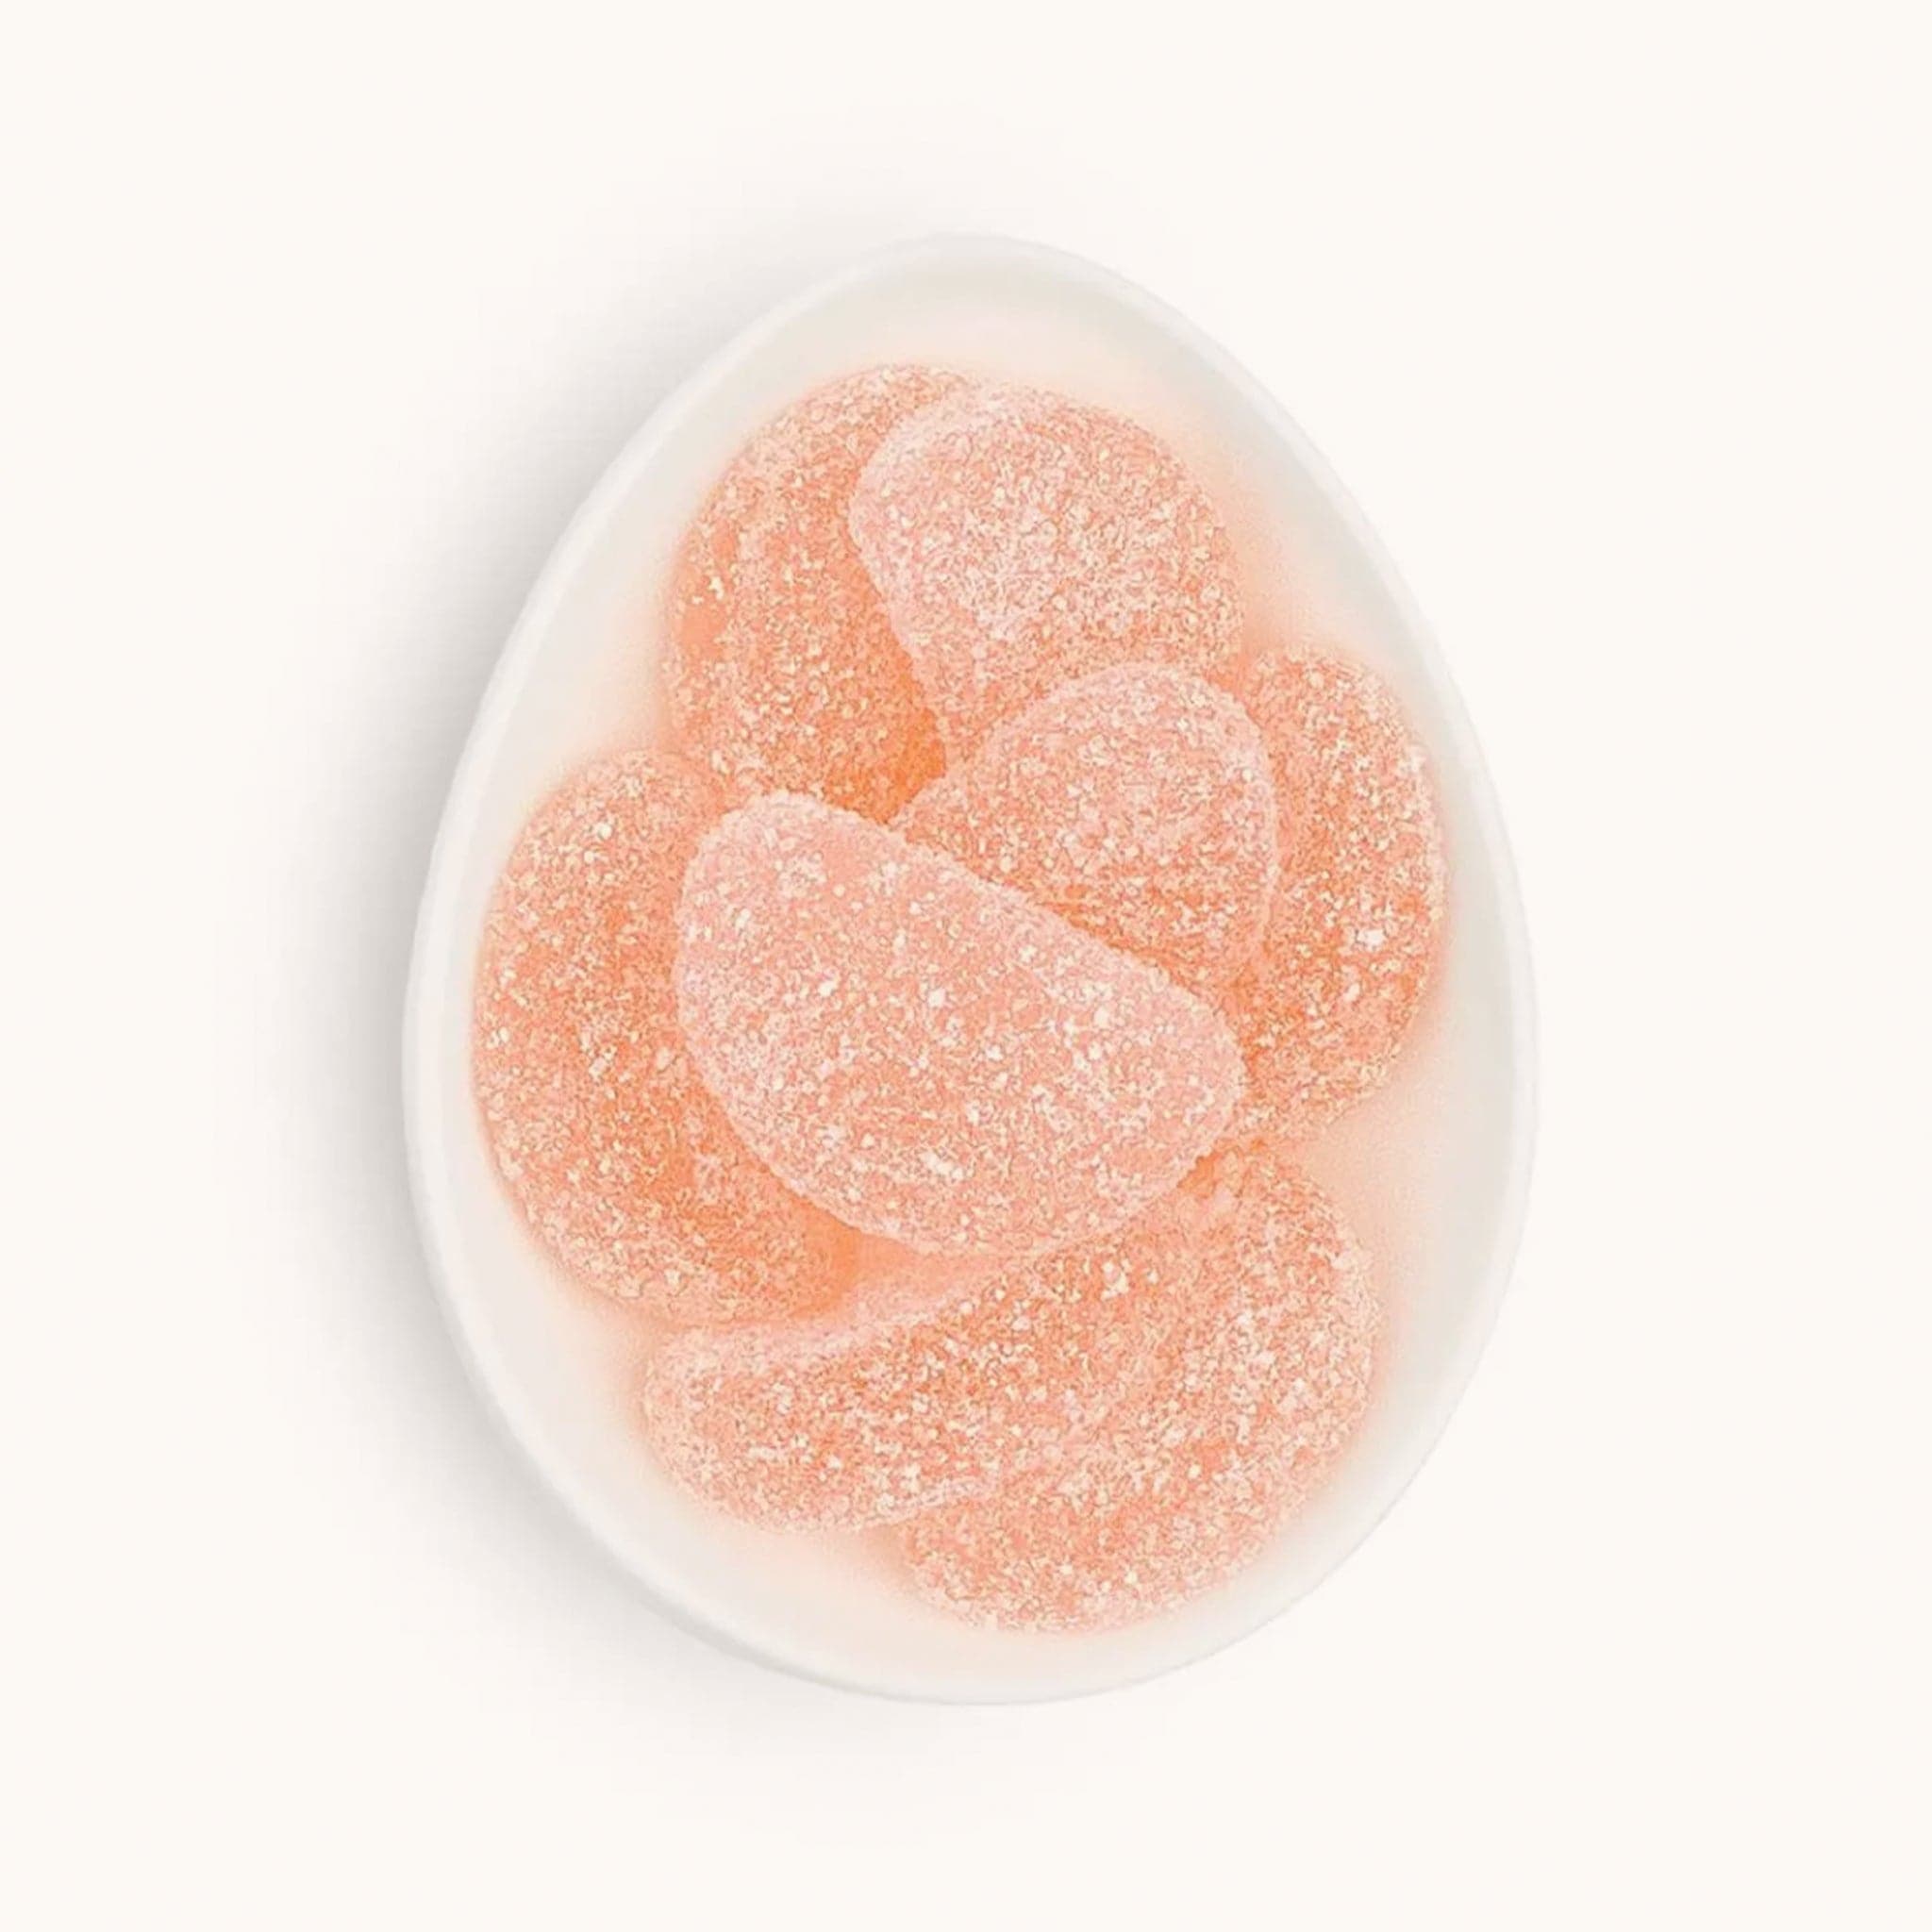 Half moon shaped grapefruit gummy slices covered in shimmering sugar crystals. The blush pink gummies are placed in a small white bowl. 